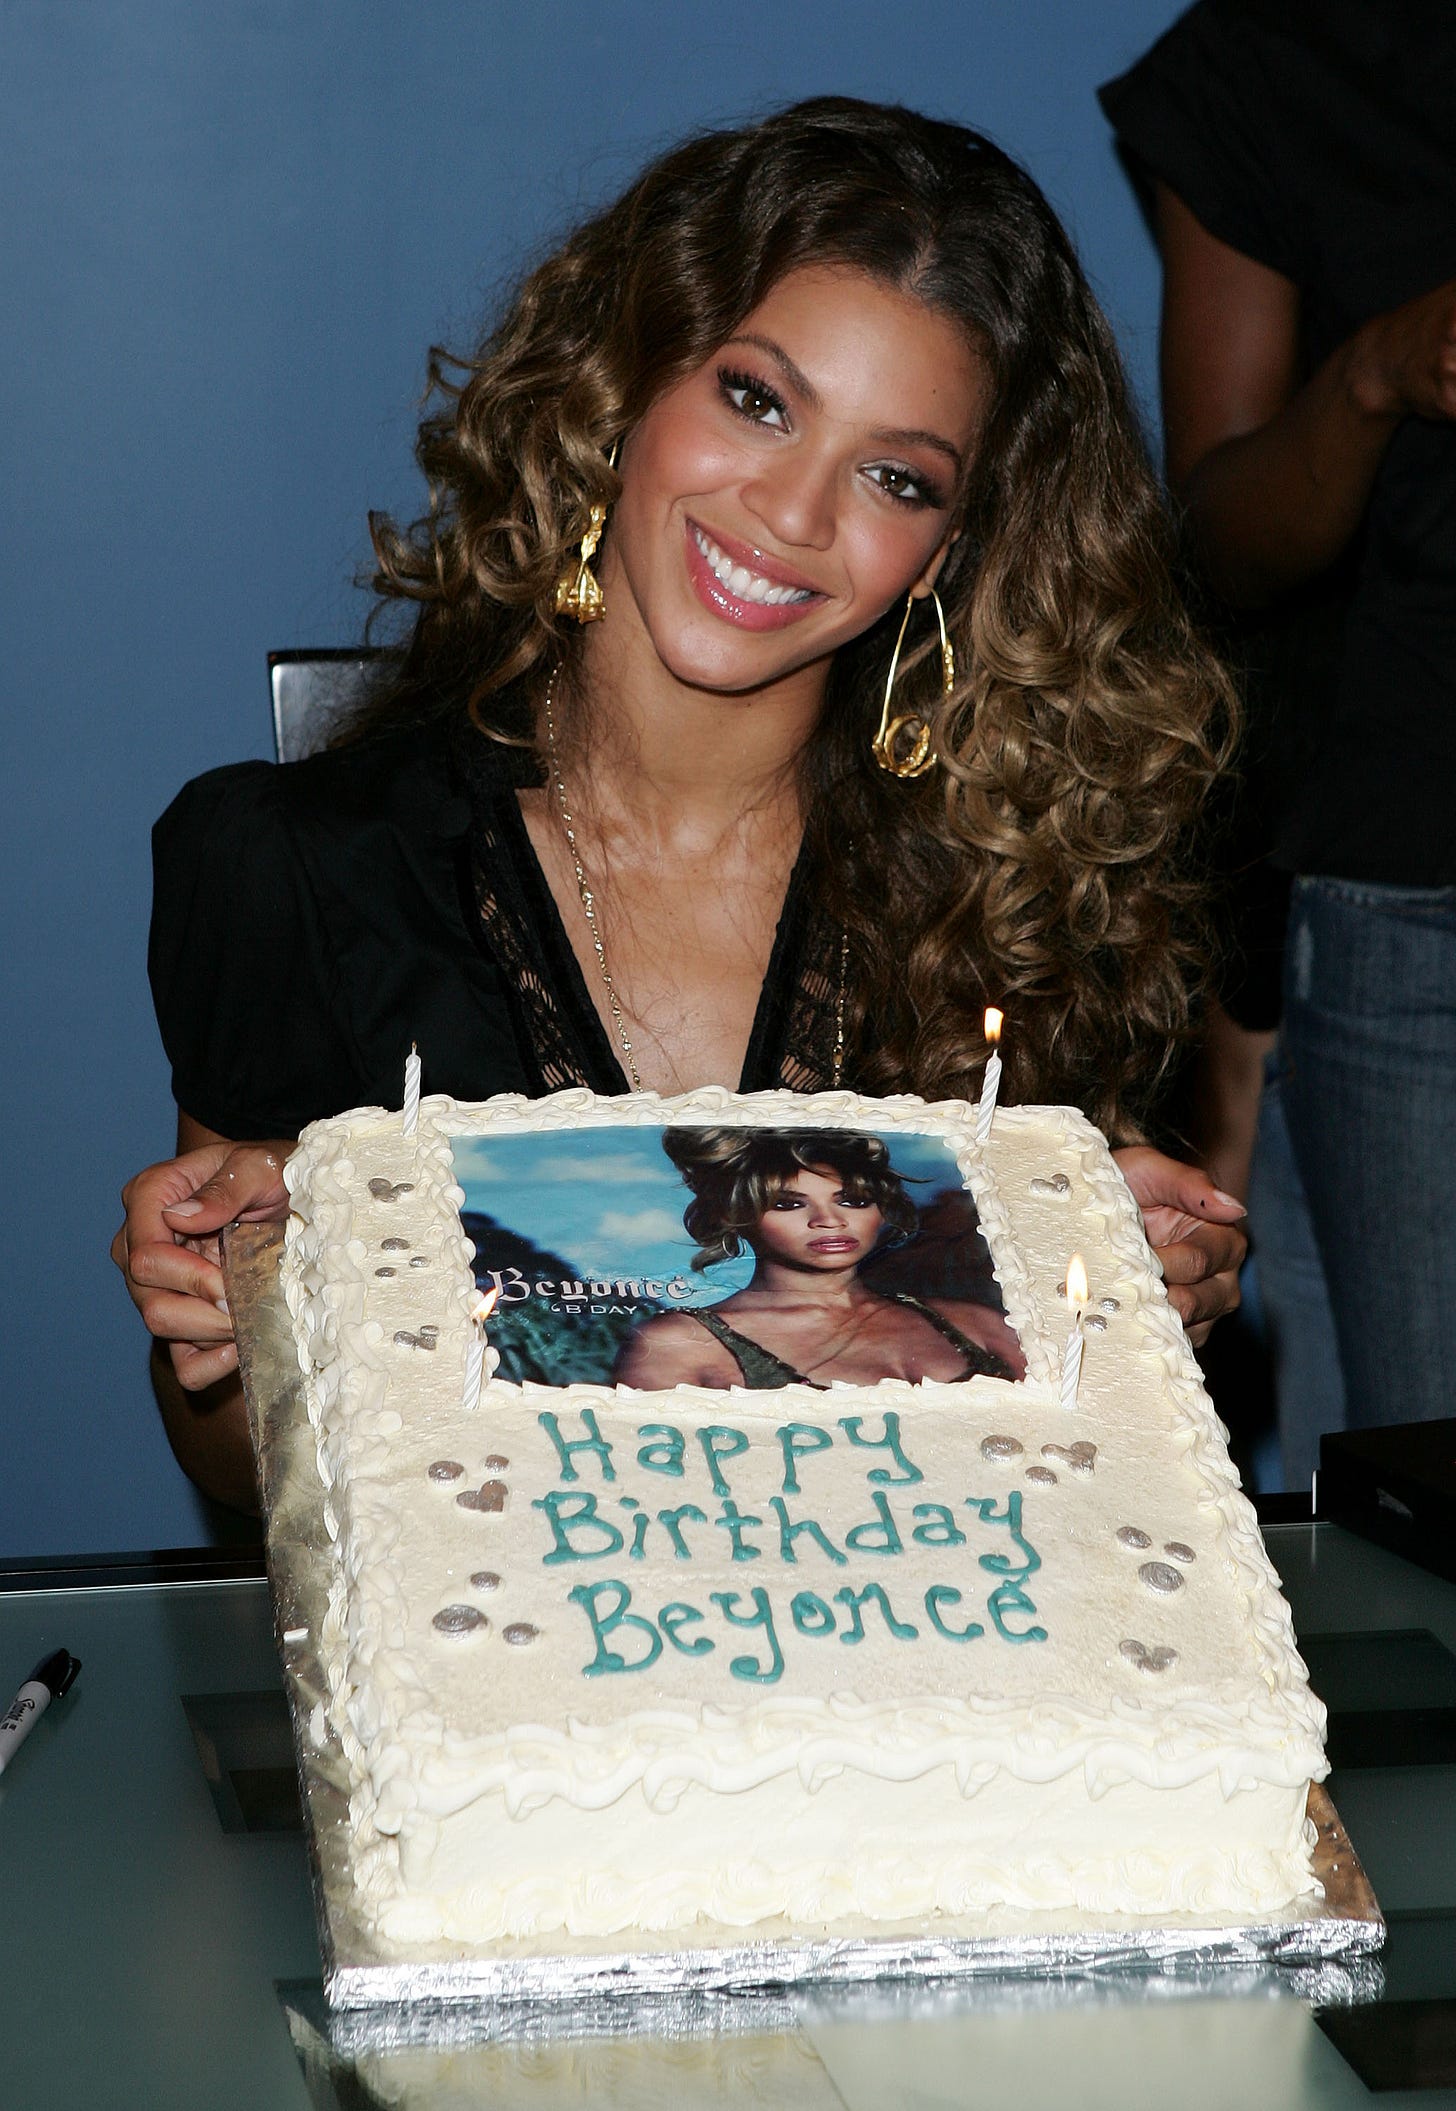 20 Sweet Photos Of Beyonce During The "B'Day" Era - Global Grind